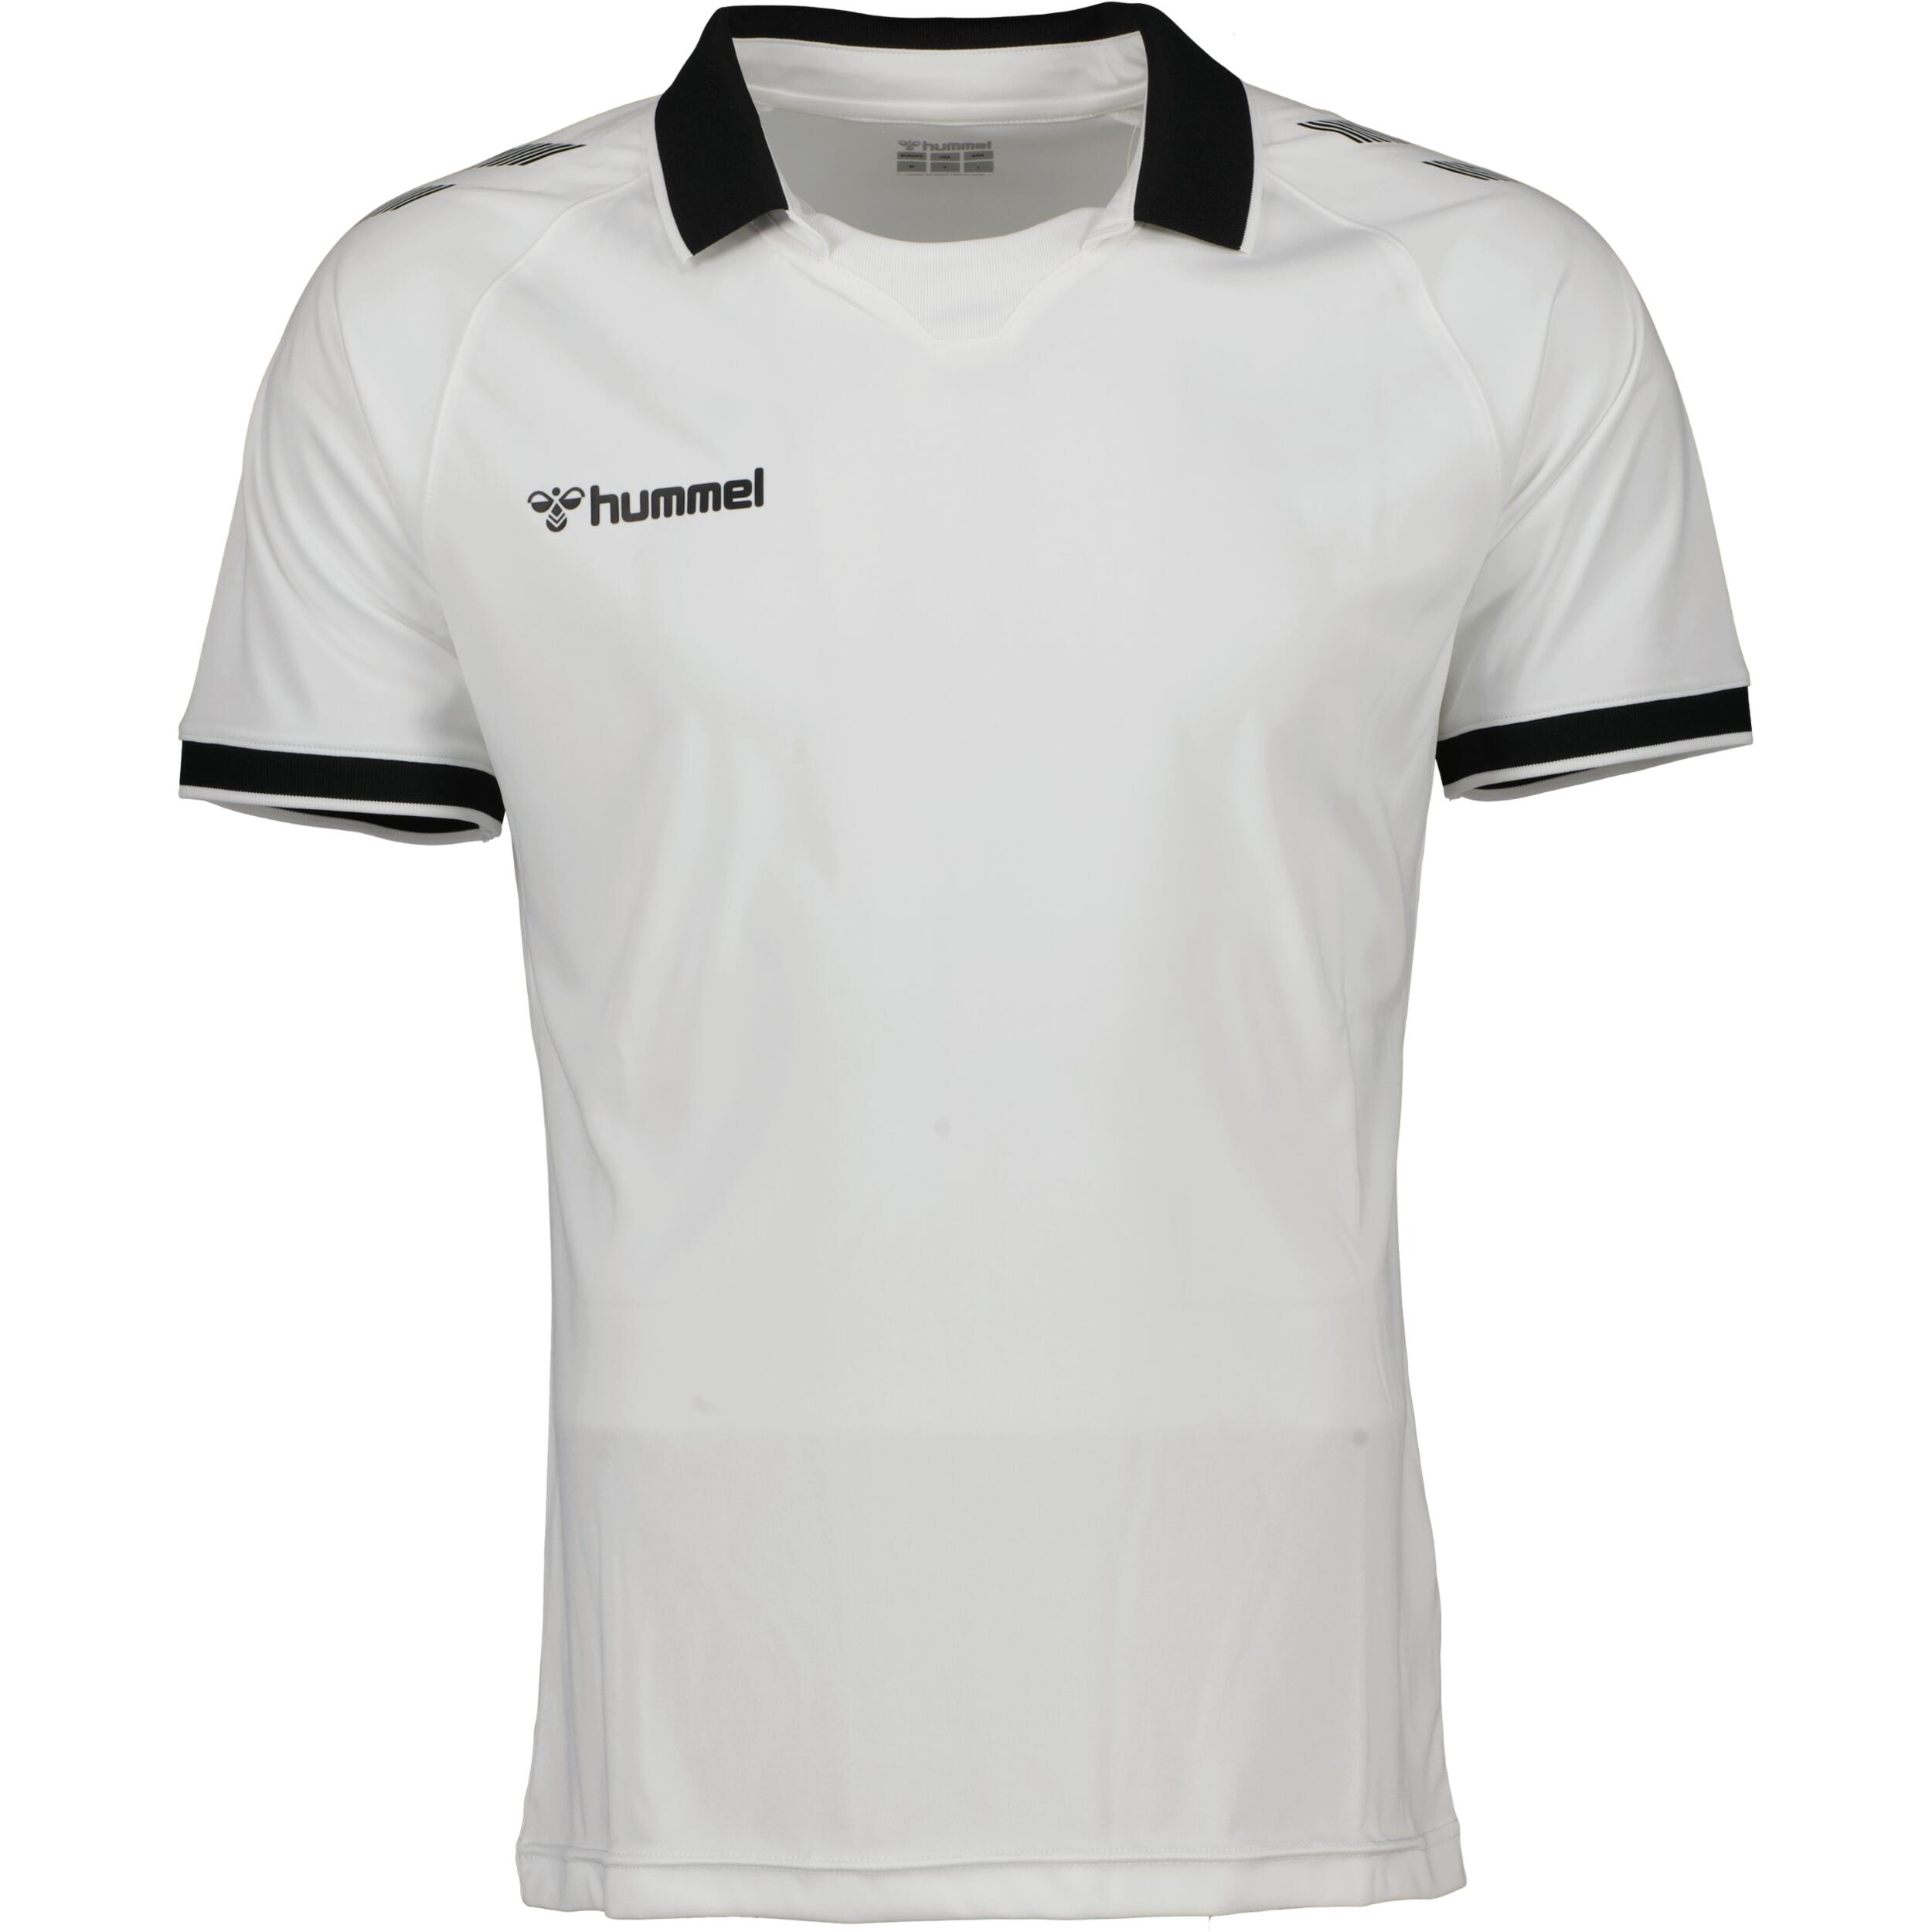 Impact jersey for juniors, great for football, in /black 1/3